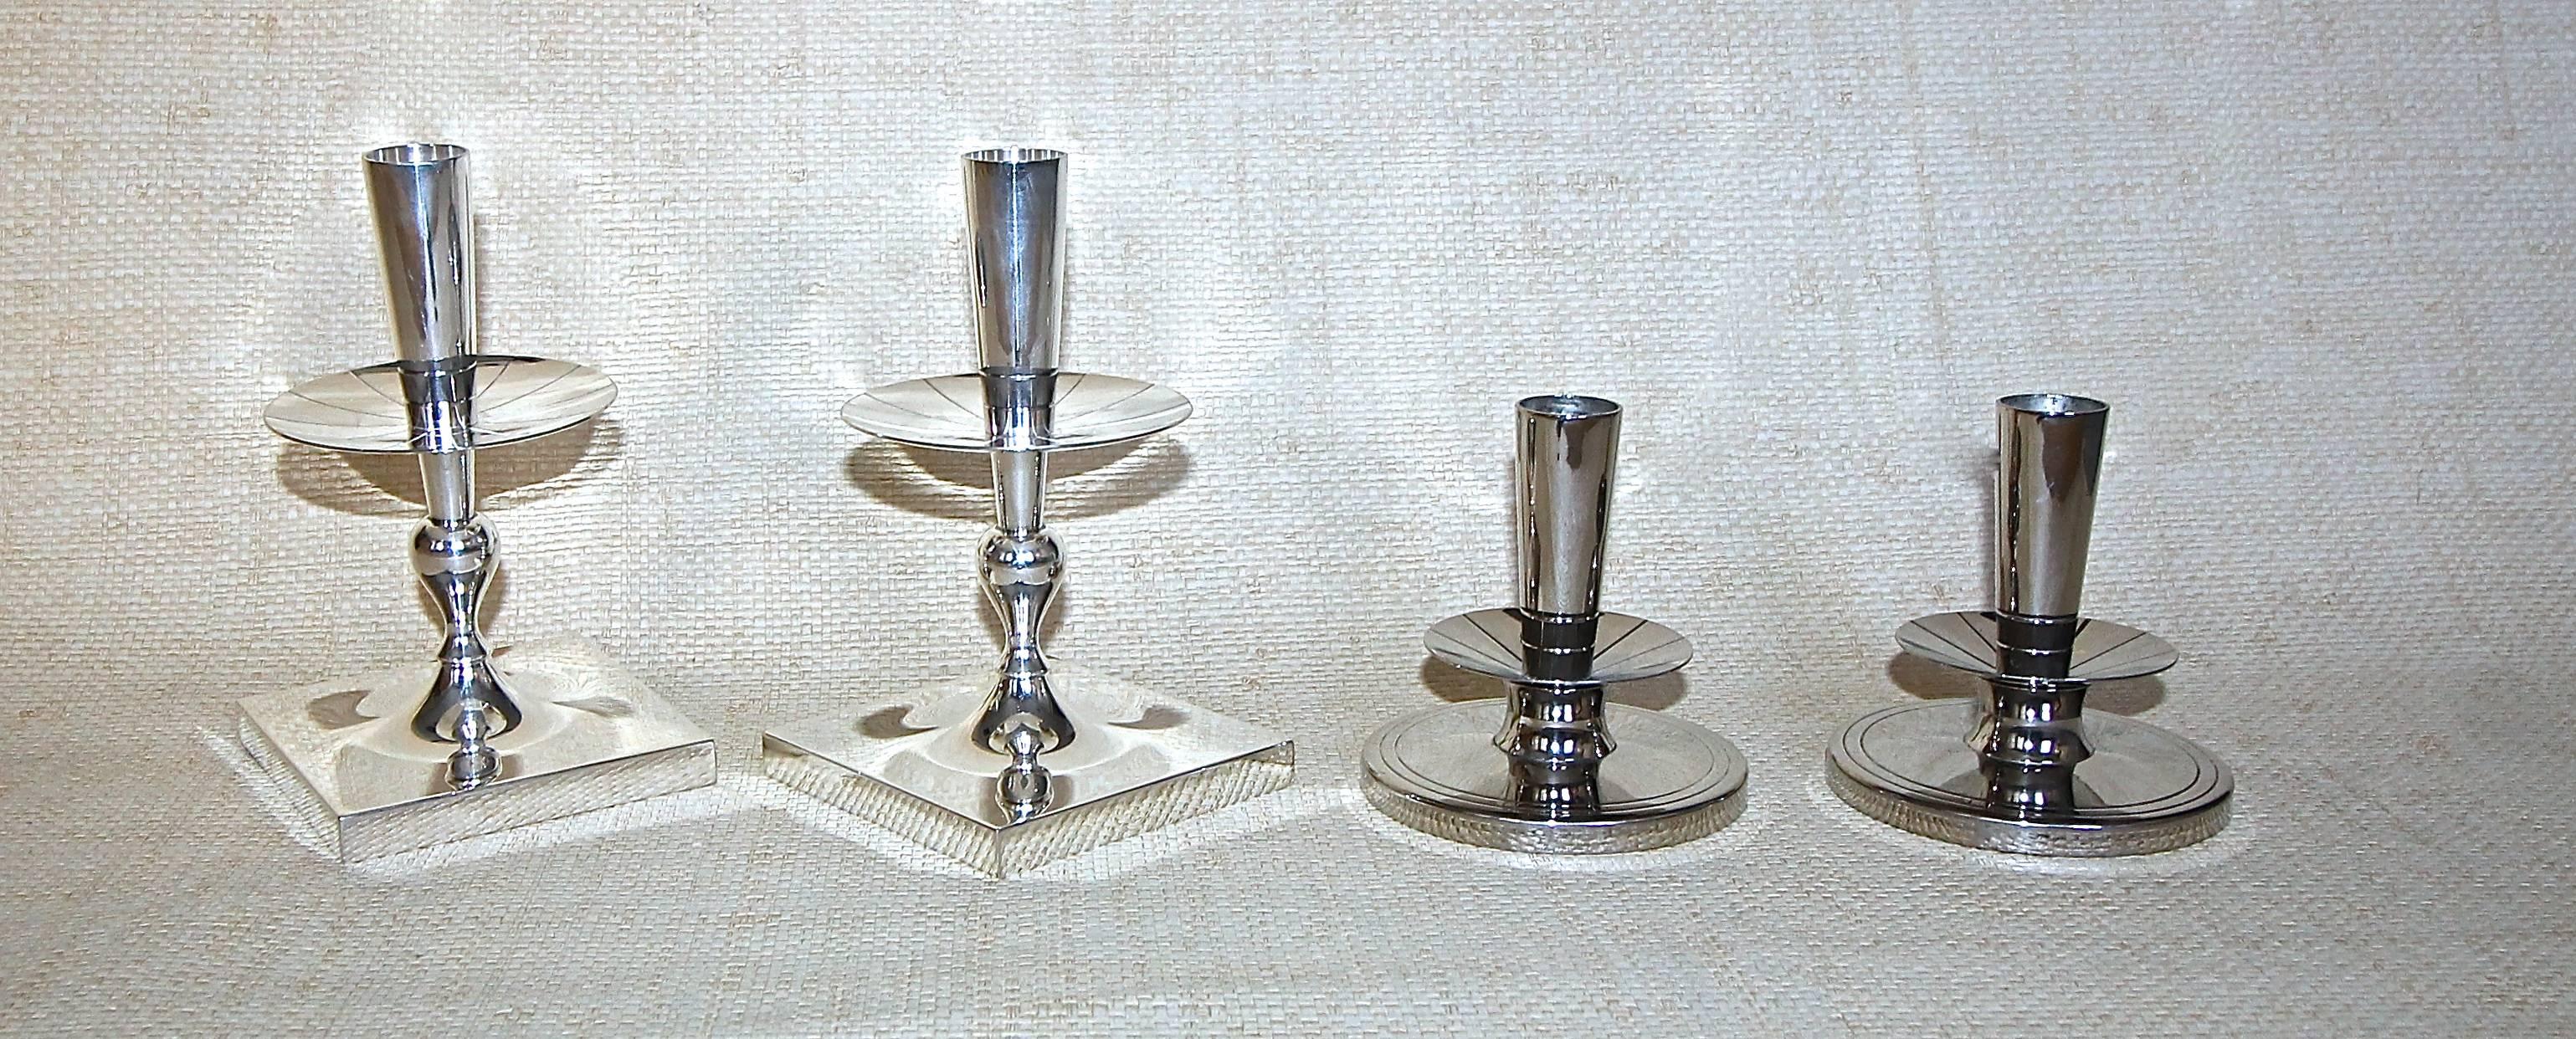 American Collection of Tommi Parzinger Designed Candlesticks